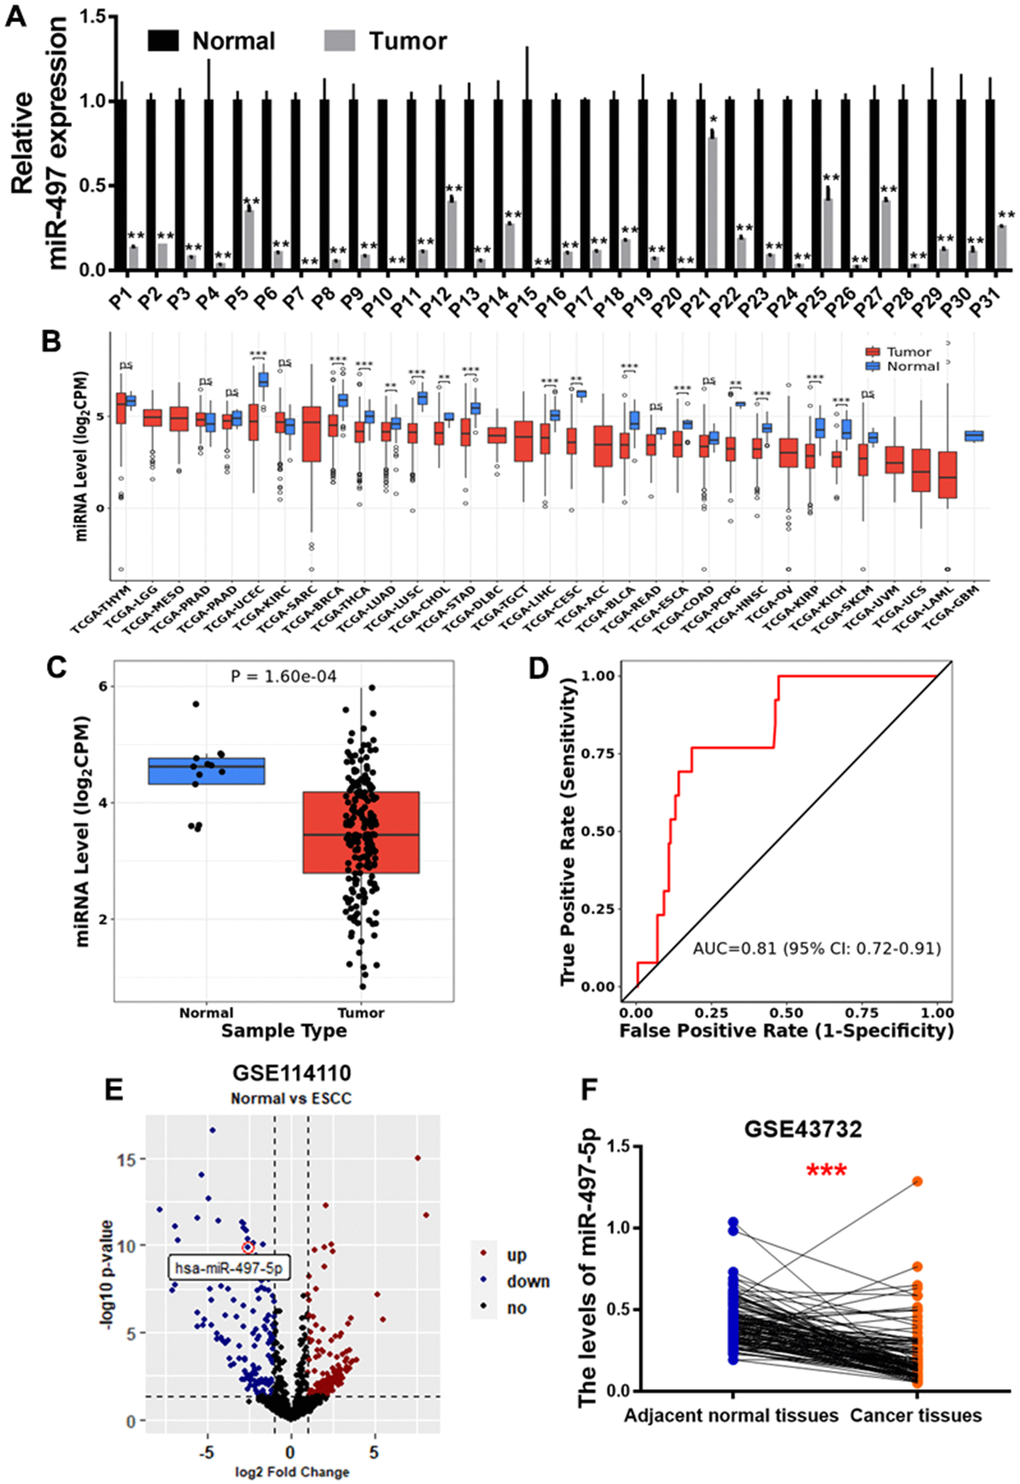 miR-497 expression is down-regulated in the tumor tissues of EC patients. (A) Compared to adjacent normal tissues, the expression levels of miR-497 in EC tissues were significantly lower. (B, C) The result of CancerMIRNome (http://bioinfo.jialab-ucr.org/CancerMIRNome/) database showed that miR-497 levels were much lower in several types of cancer tissues, especially in esophageal cancer. (D) ROC curve showed that miR-497 may be used as a biomarker in EC prognosis. (E) Volcano plot of GSE114110 displayed differentially expressed microRNAs in normal and EC tissues. (F) Analysis of GSE43732 showed that miR-497 expression levels were significantly lower in EC samples. Data were representative of 3 independent experiments. * indicated significant difference at p0.05.